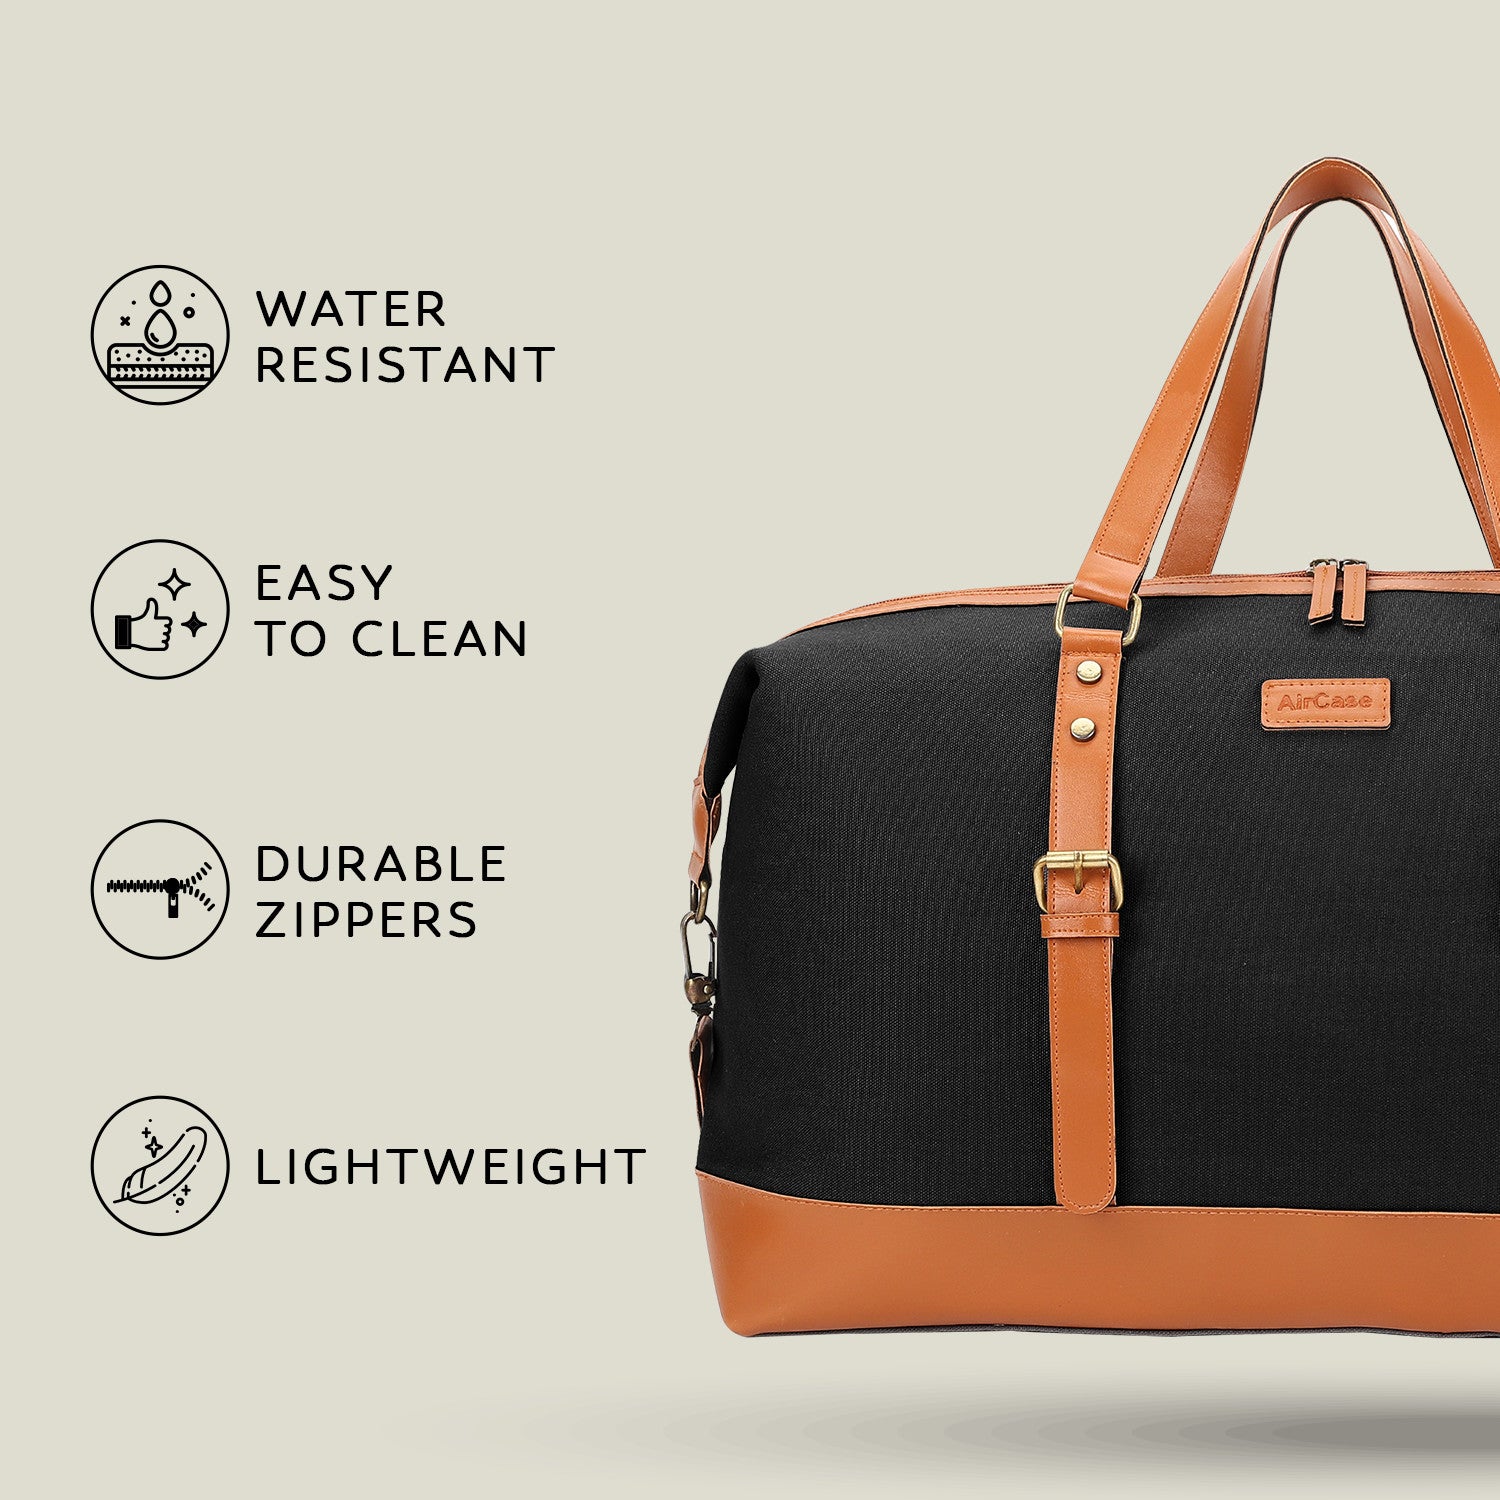 AirCase C51 Unisex Vegan Leather 20 Litre Duffle, Shoulder Small Travel Bag  - Price in India, Reviews, Ratings & Specifications | Flipkart.com